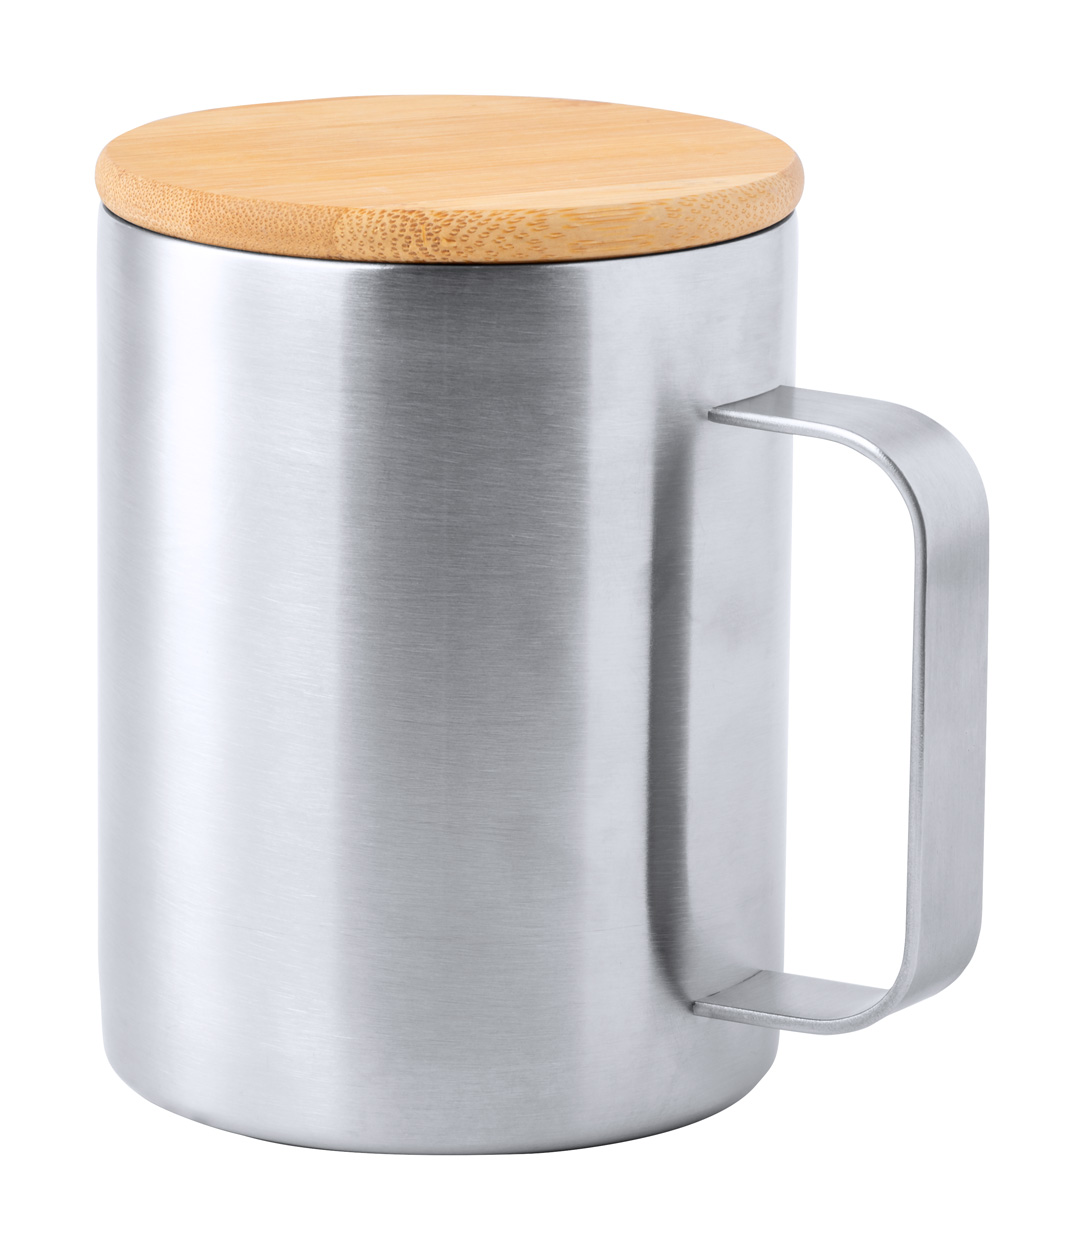 Eco Gifts Ricaly stainless steel mug